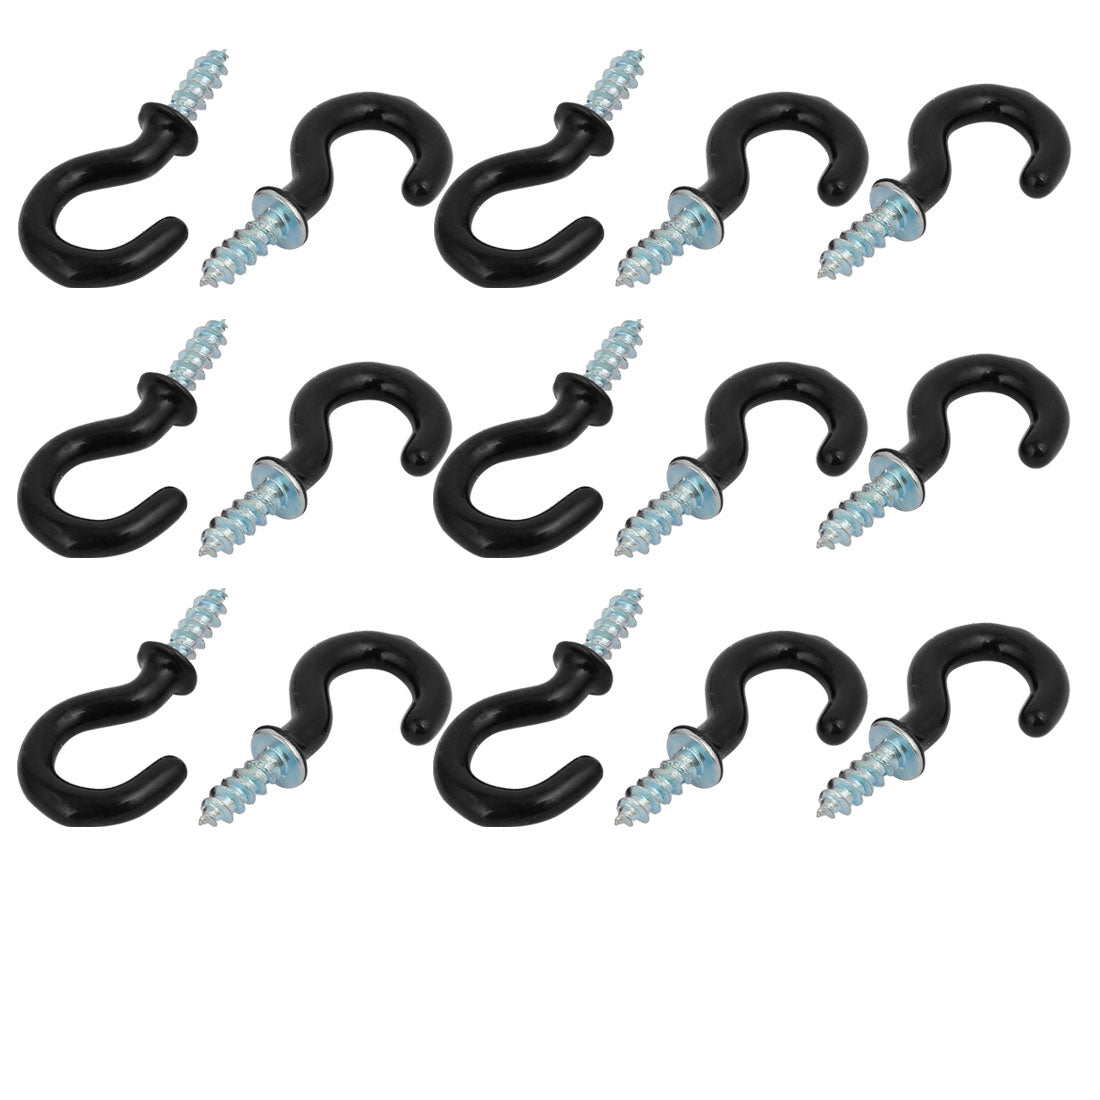 uxcell Uxcell 5/8 Inch Plastic Coated Screw-in Open Cup Ceiling Hooks Hangers Black 15pcs